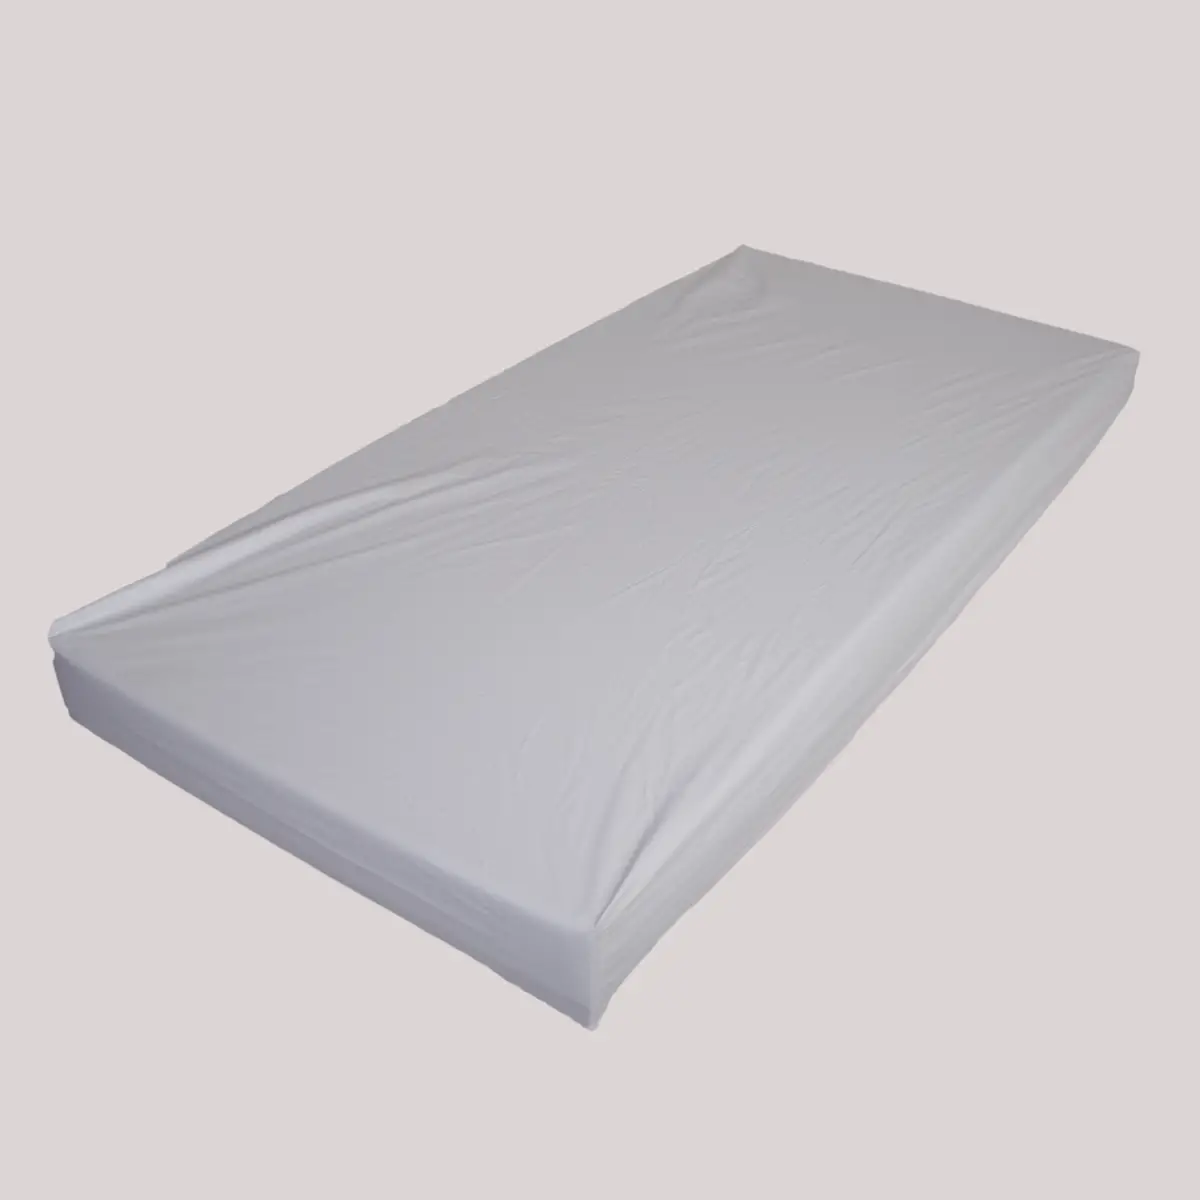 3 reasons why you should use a mattress protector